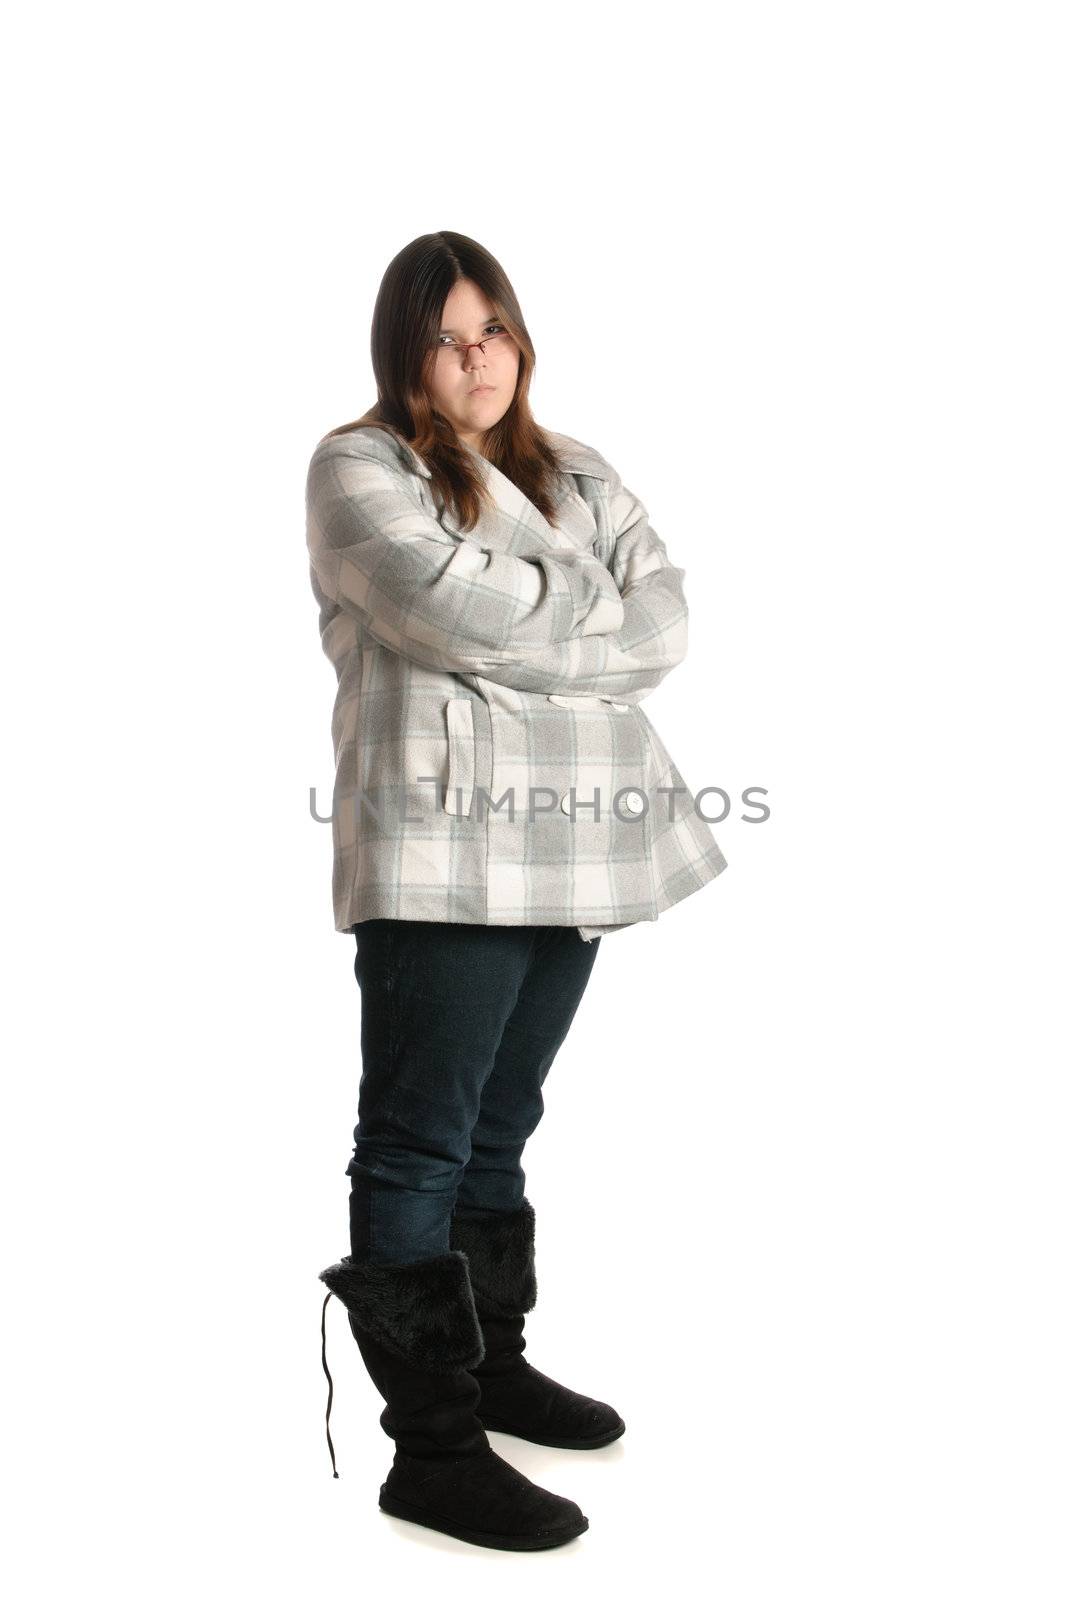 A full body view of a mad teenage girl, isolated against a white background